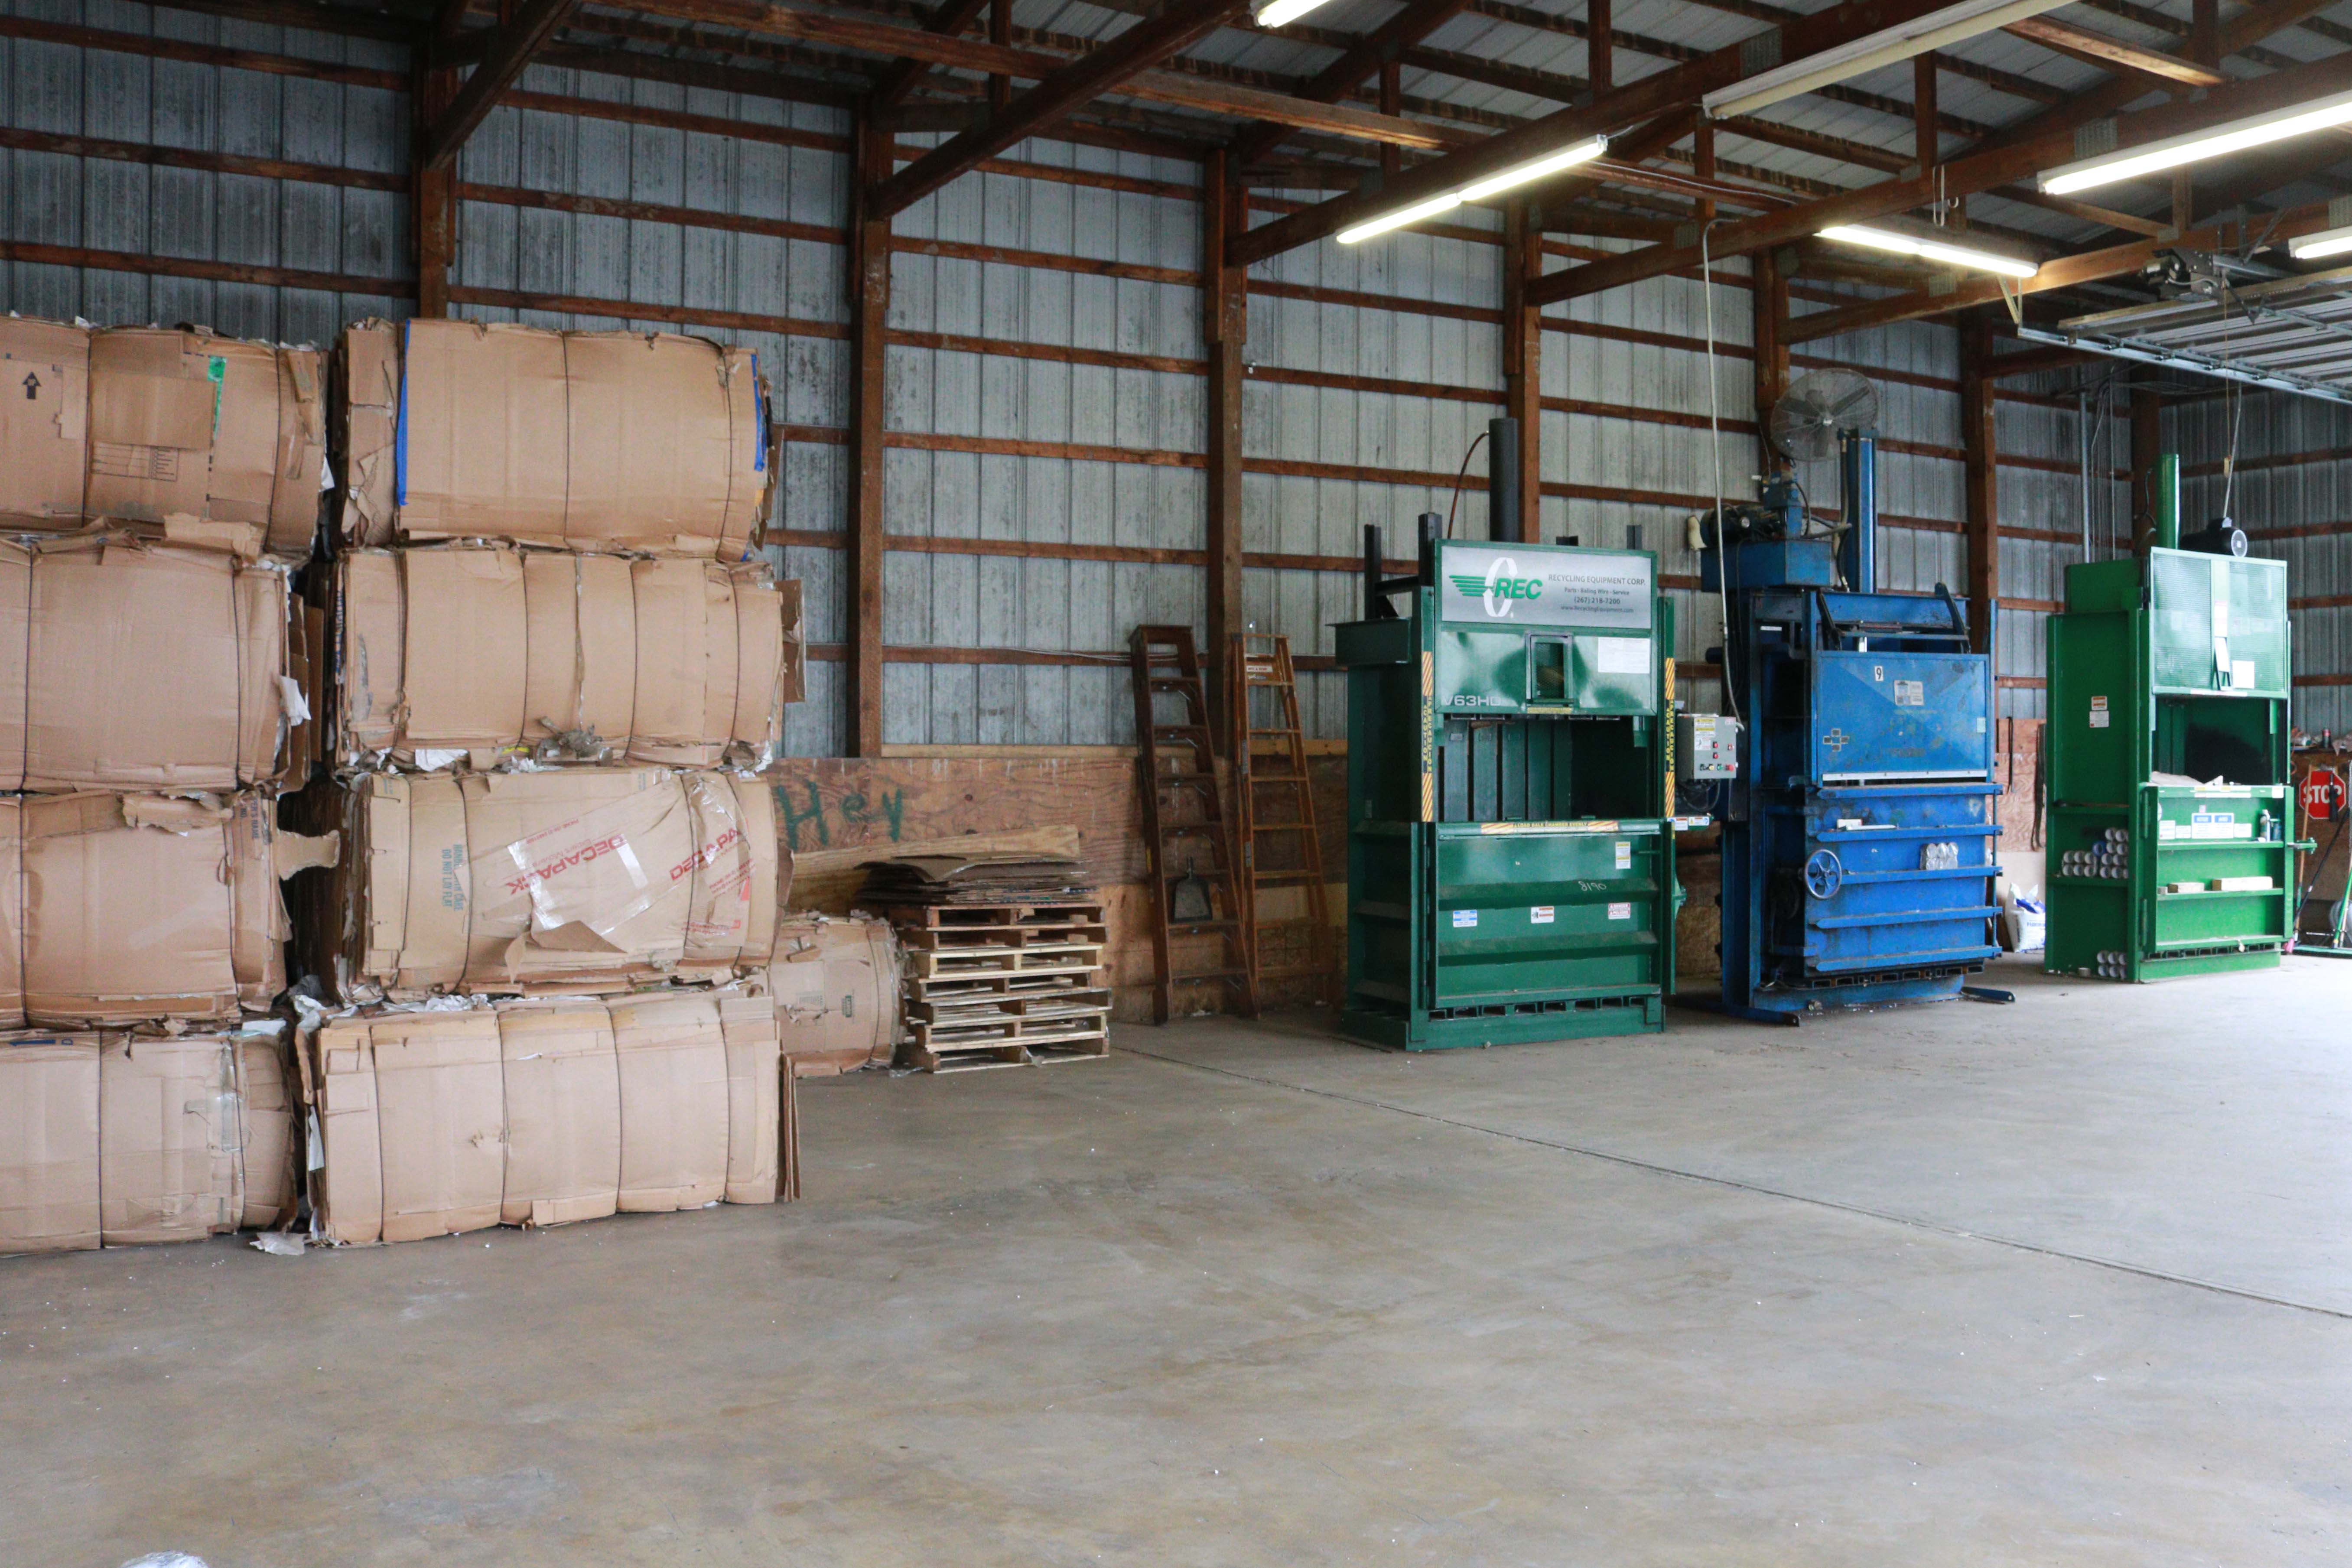 The interior of Hilldrup's Recycling Center